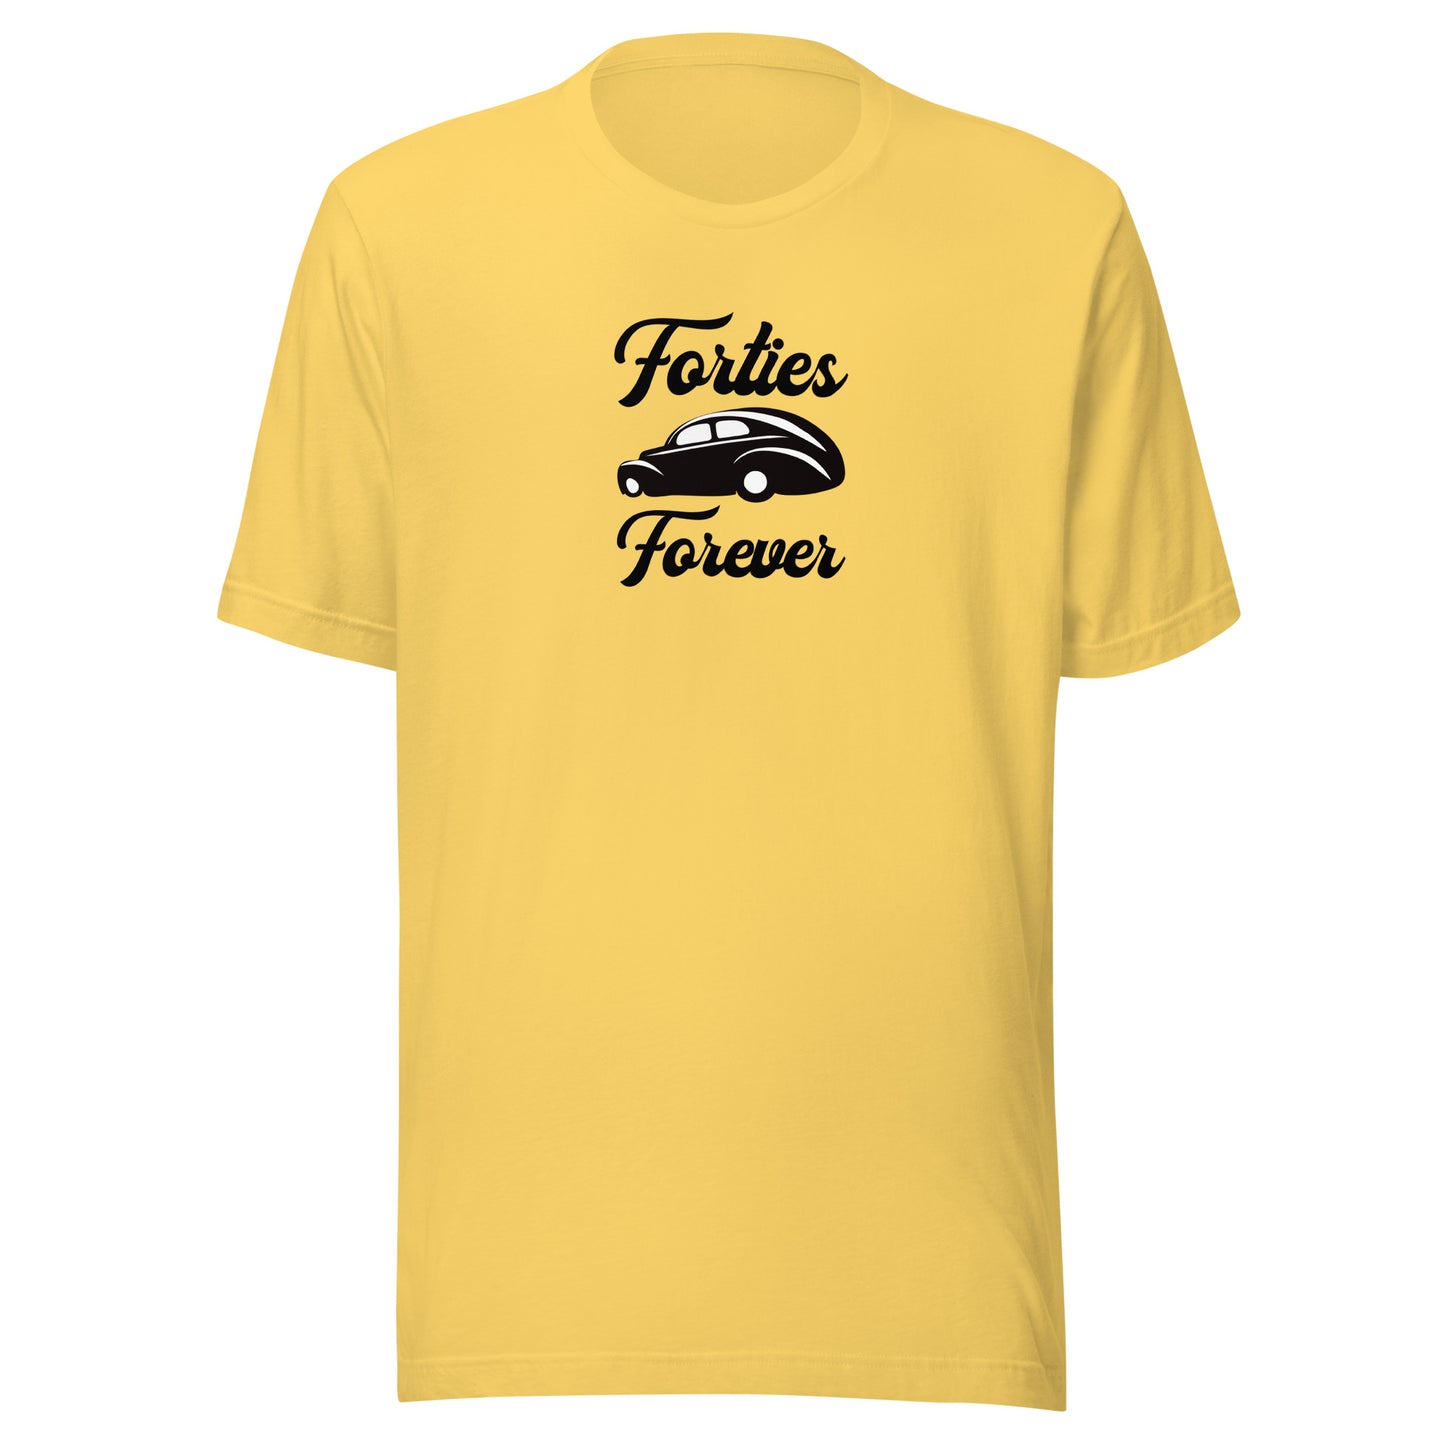 Unisex t-shirt Kukloso Forties Forever Black - Free Shipping